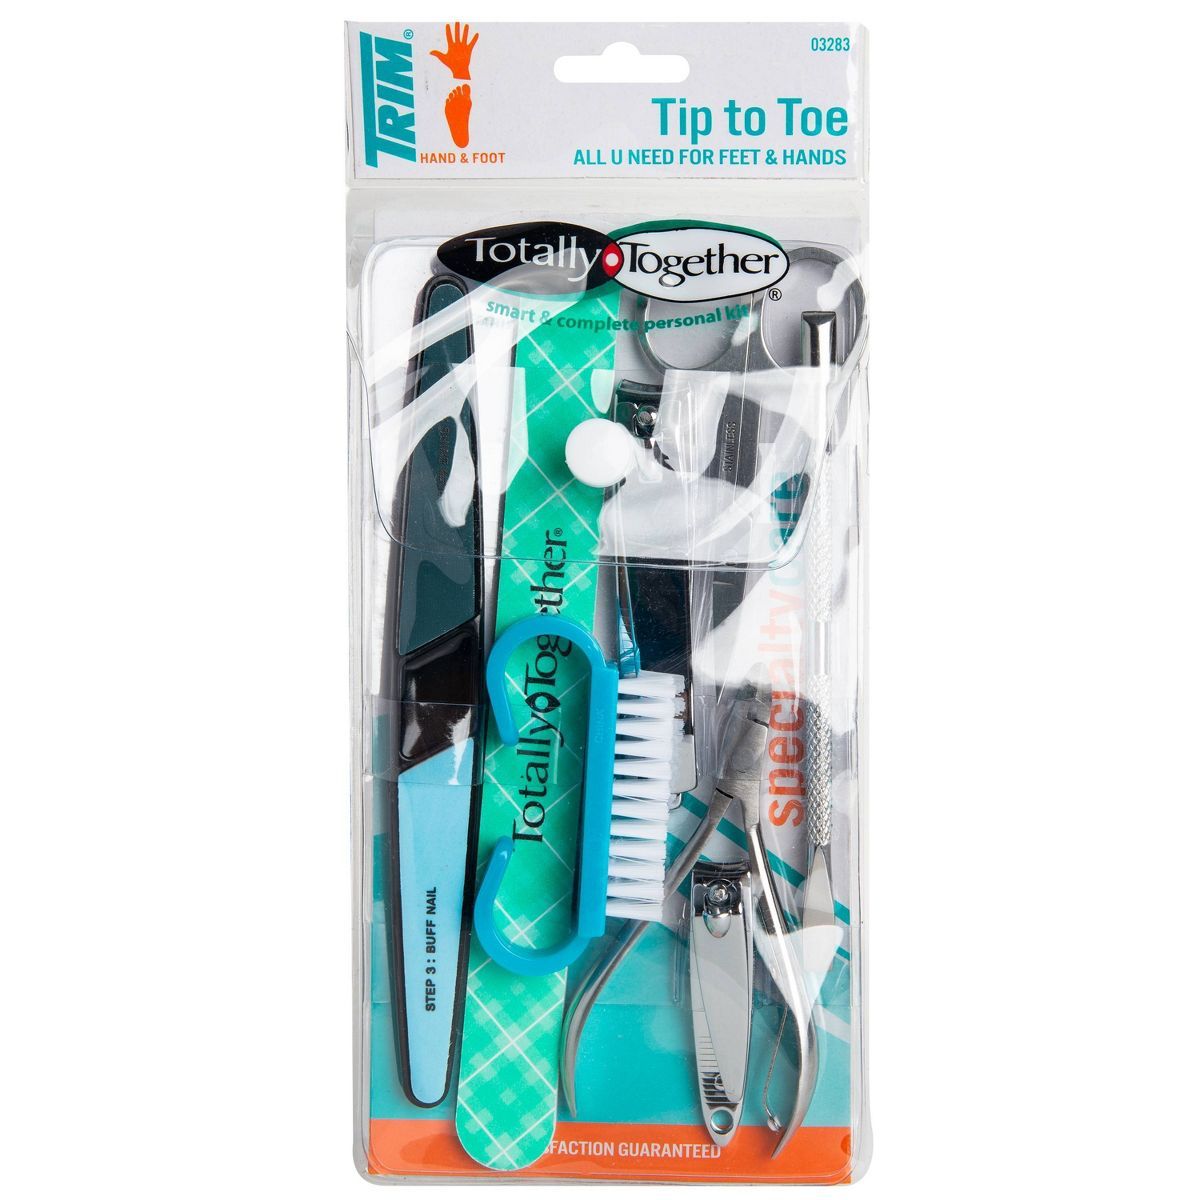 Trim Totally Together Personal Grooming Nail Care Kit - 8pc | Target